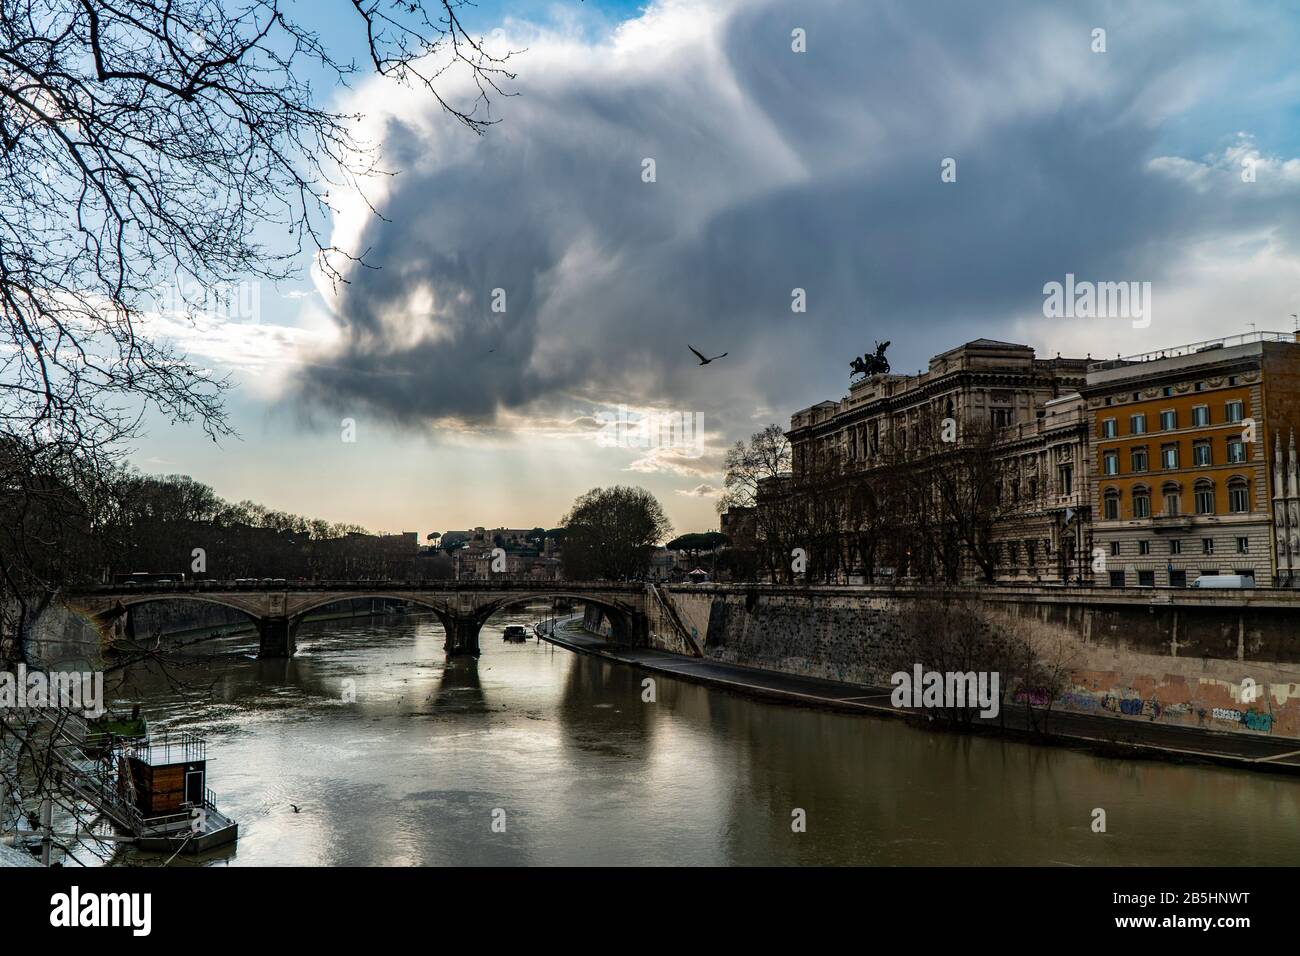 The River Tevere, Rome, in a cloudy spring day Stock Photo